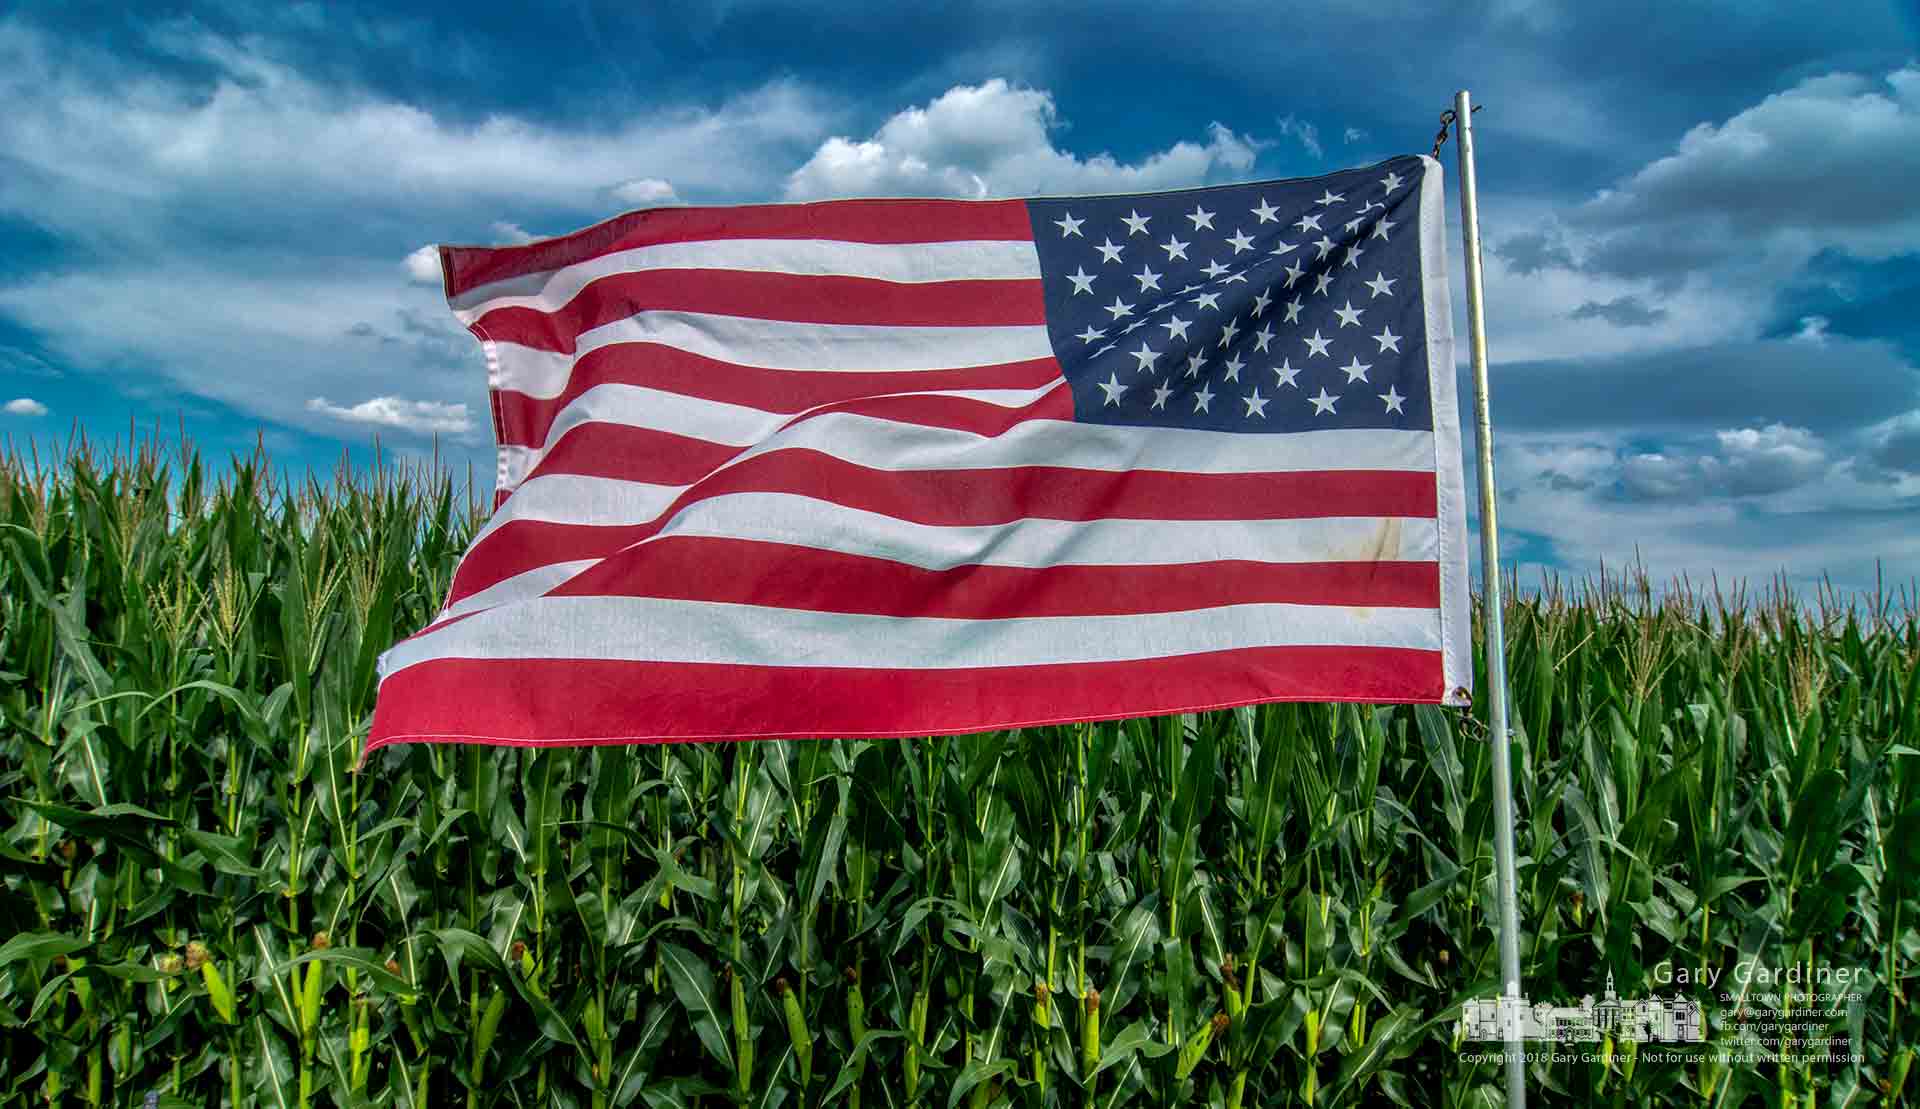 The American flag flies along a cornrow at the edge of the Yarnell farm fields on Africa Road. My Final Photo for July 26, 2018.